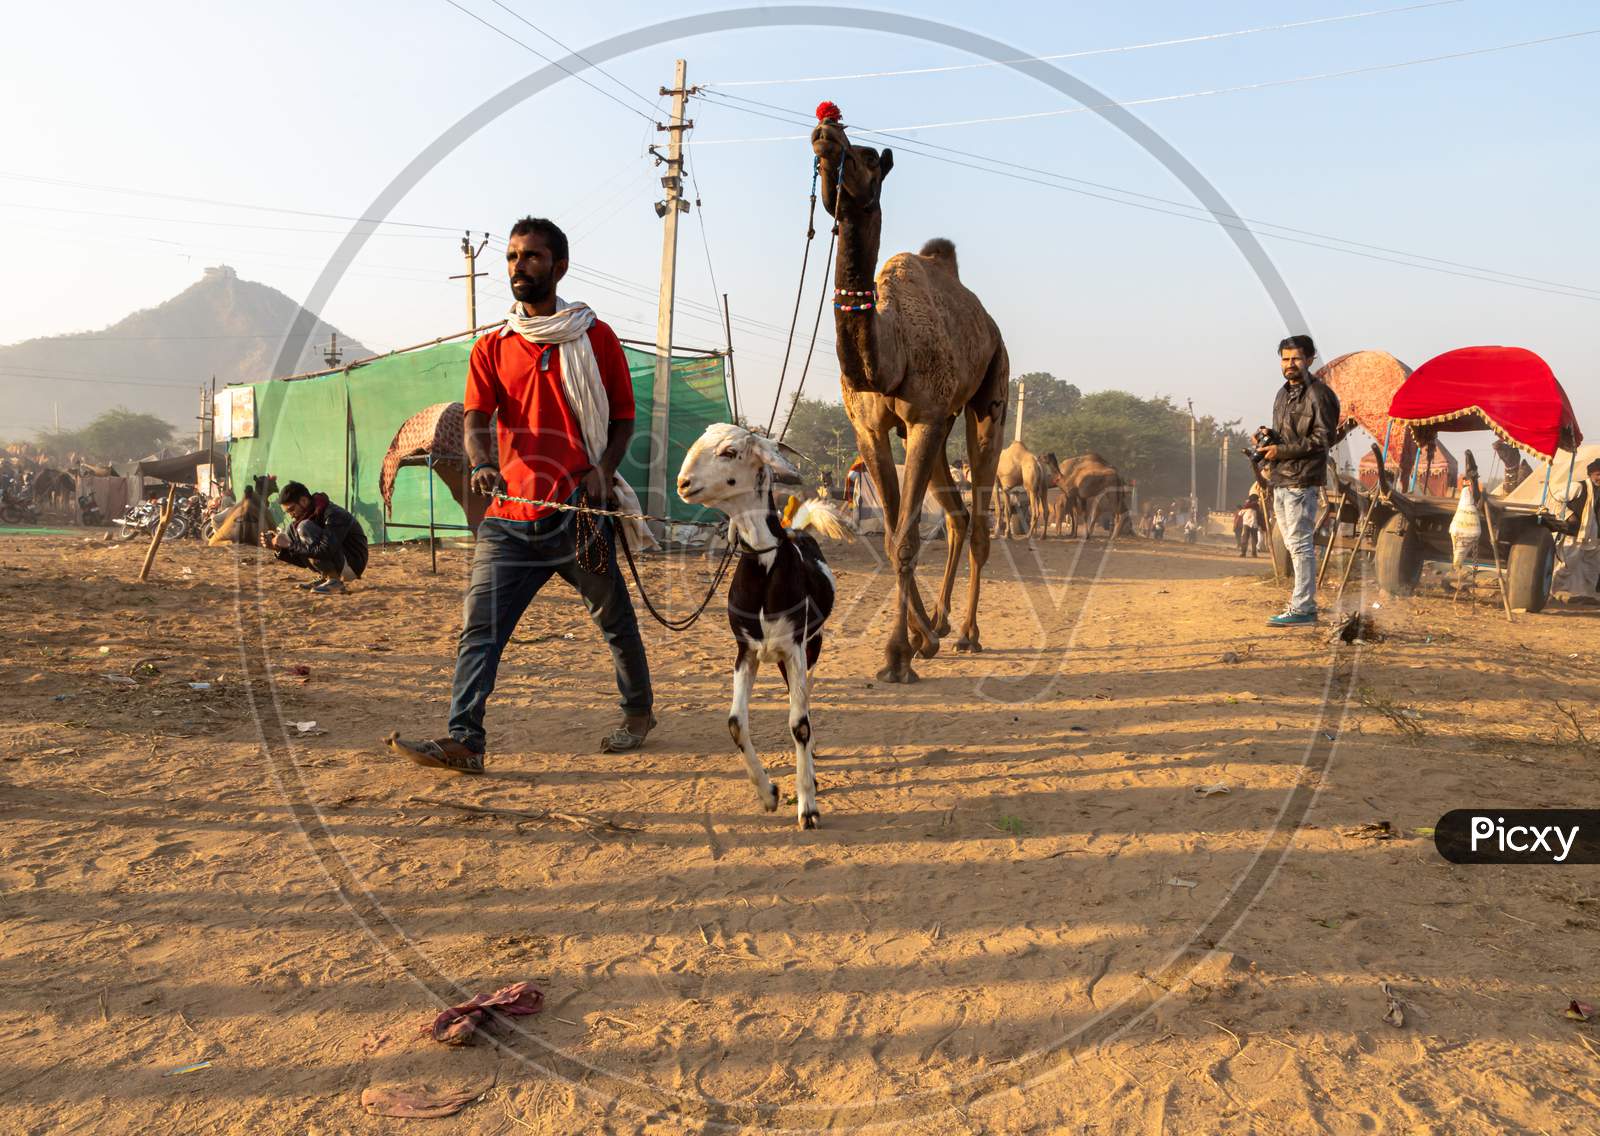 A Man With His Camel And Goat At Pushkar Camel Festival.